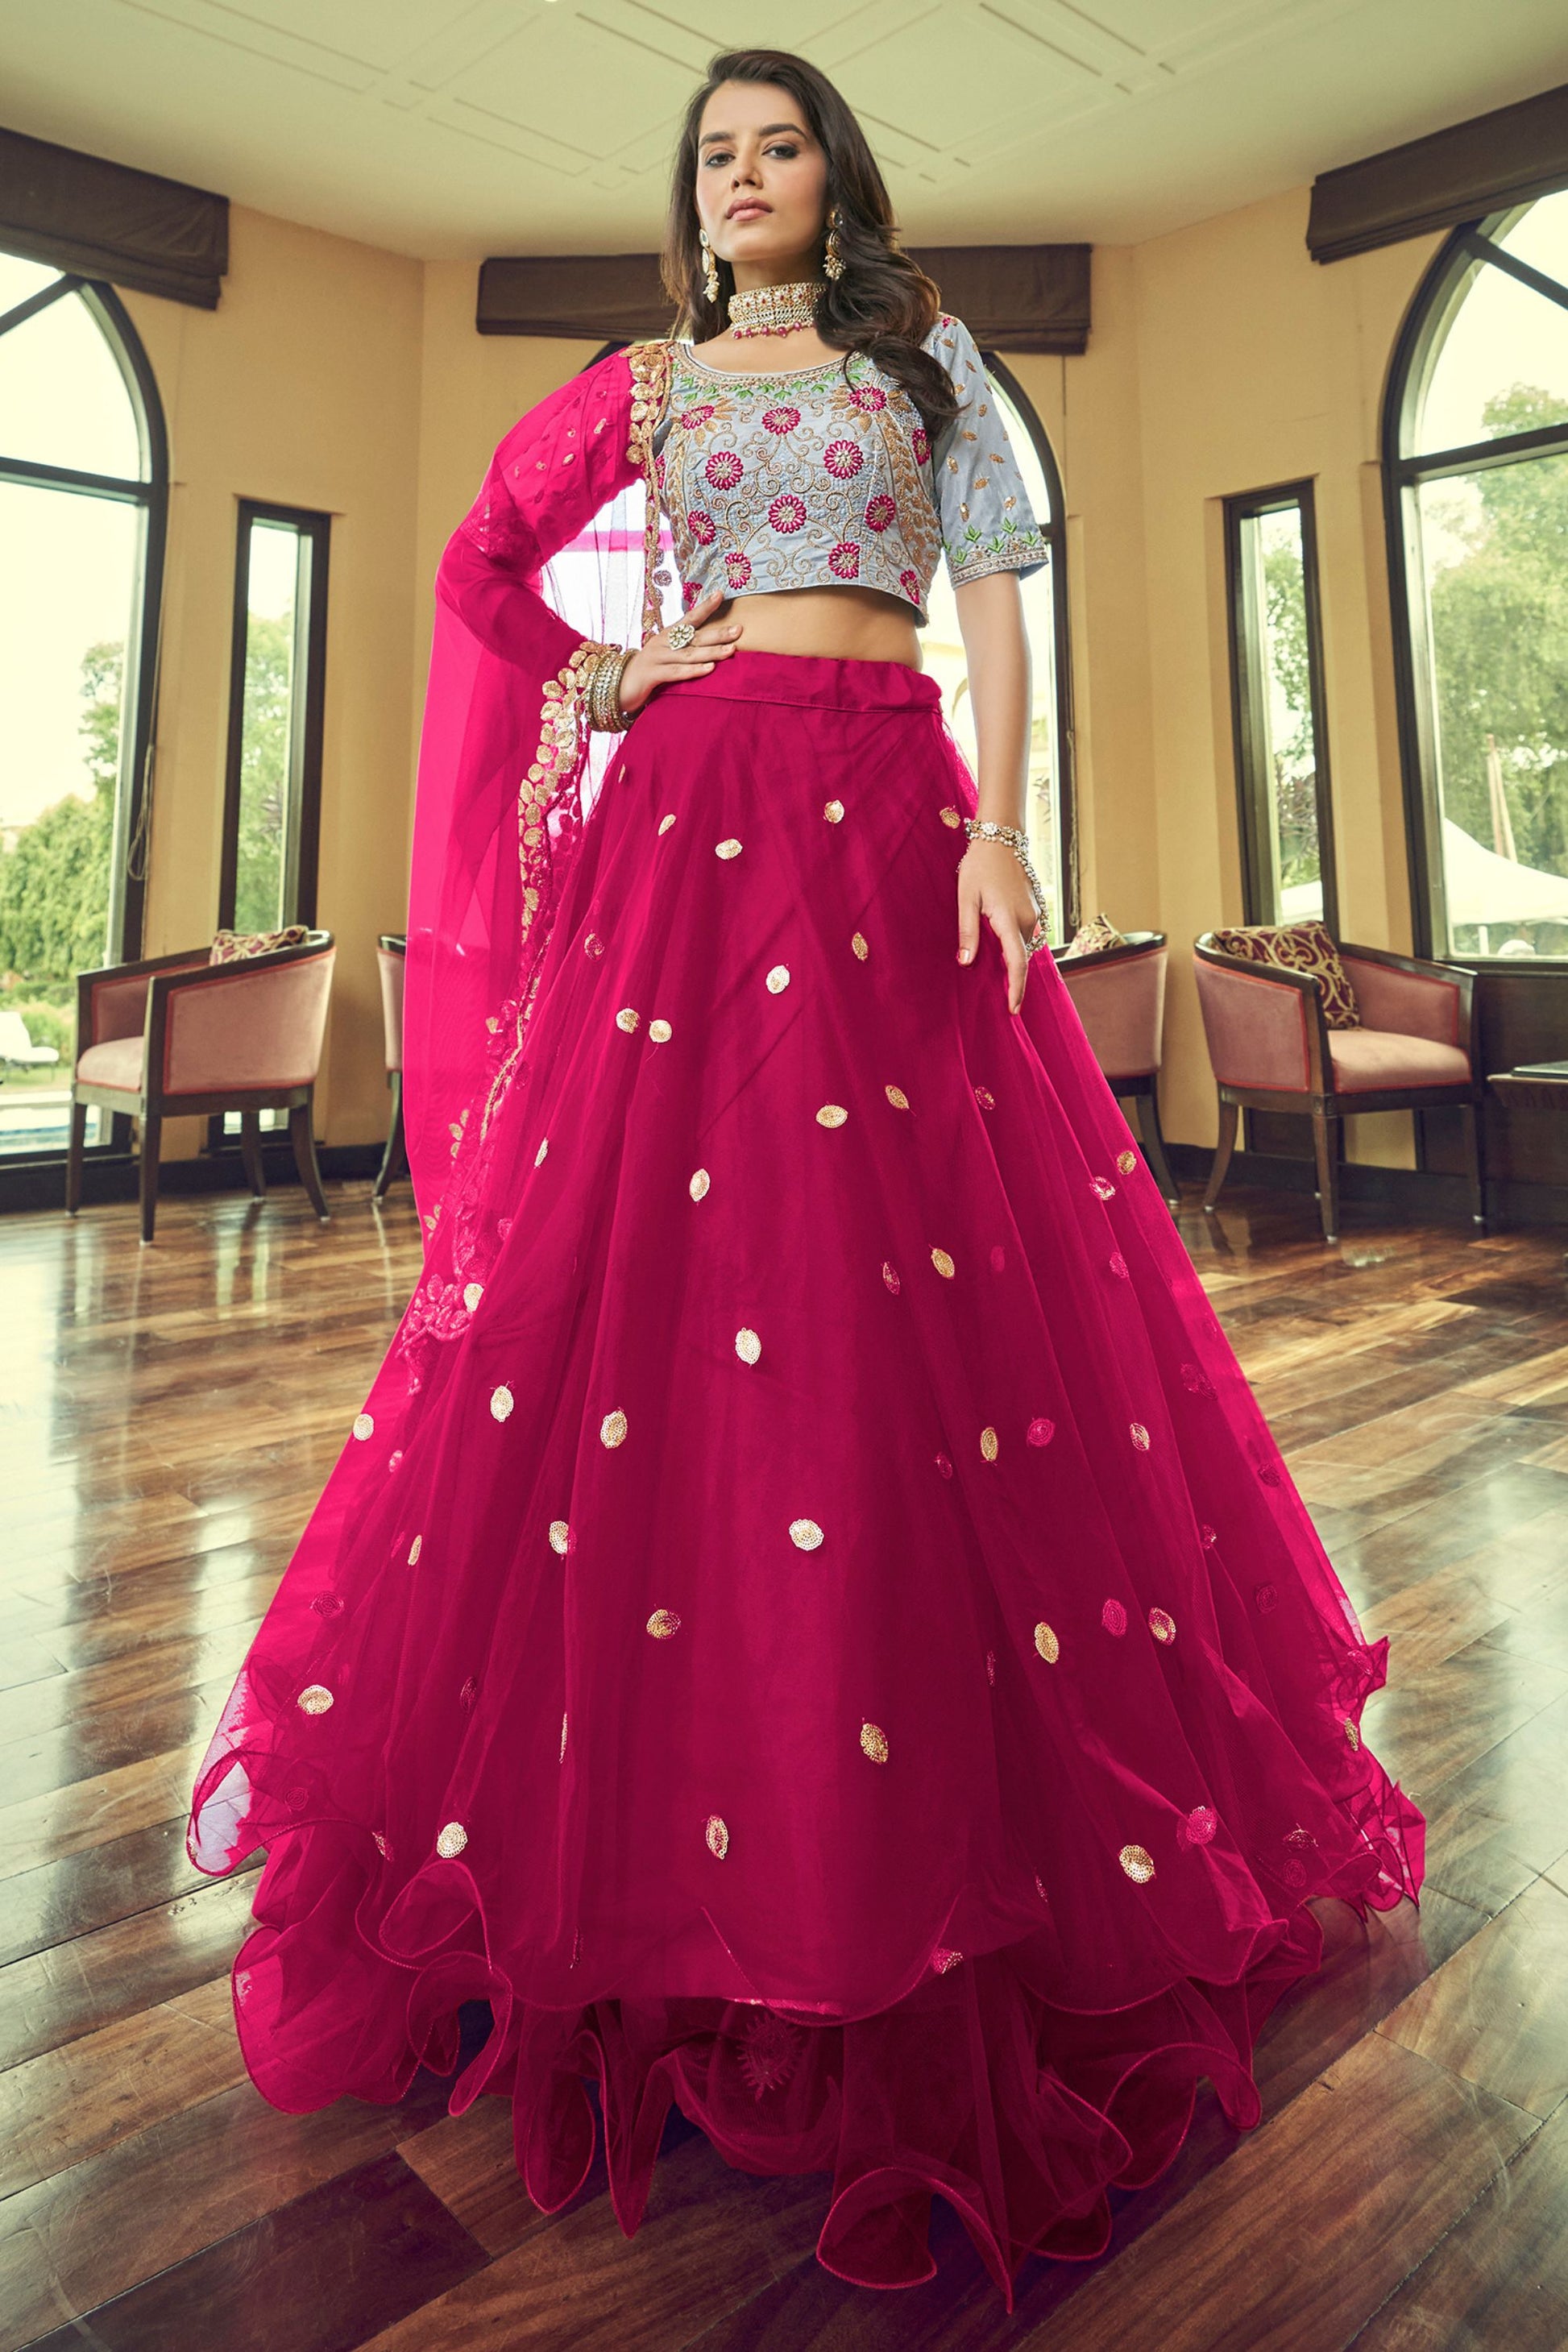 Red Pakistani Silk Ruffle Lehenga Choli For Indian Festivals & Weddings - Sequence Embroidery Work, Thread Embroidery Work,